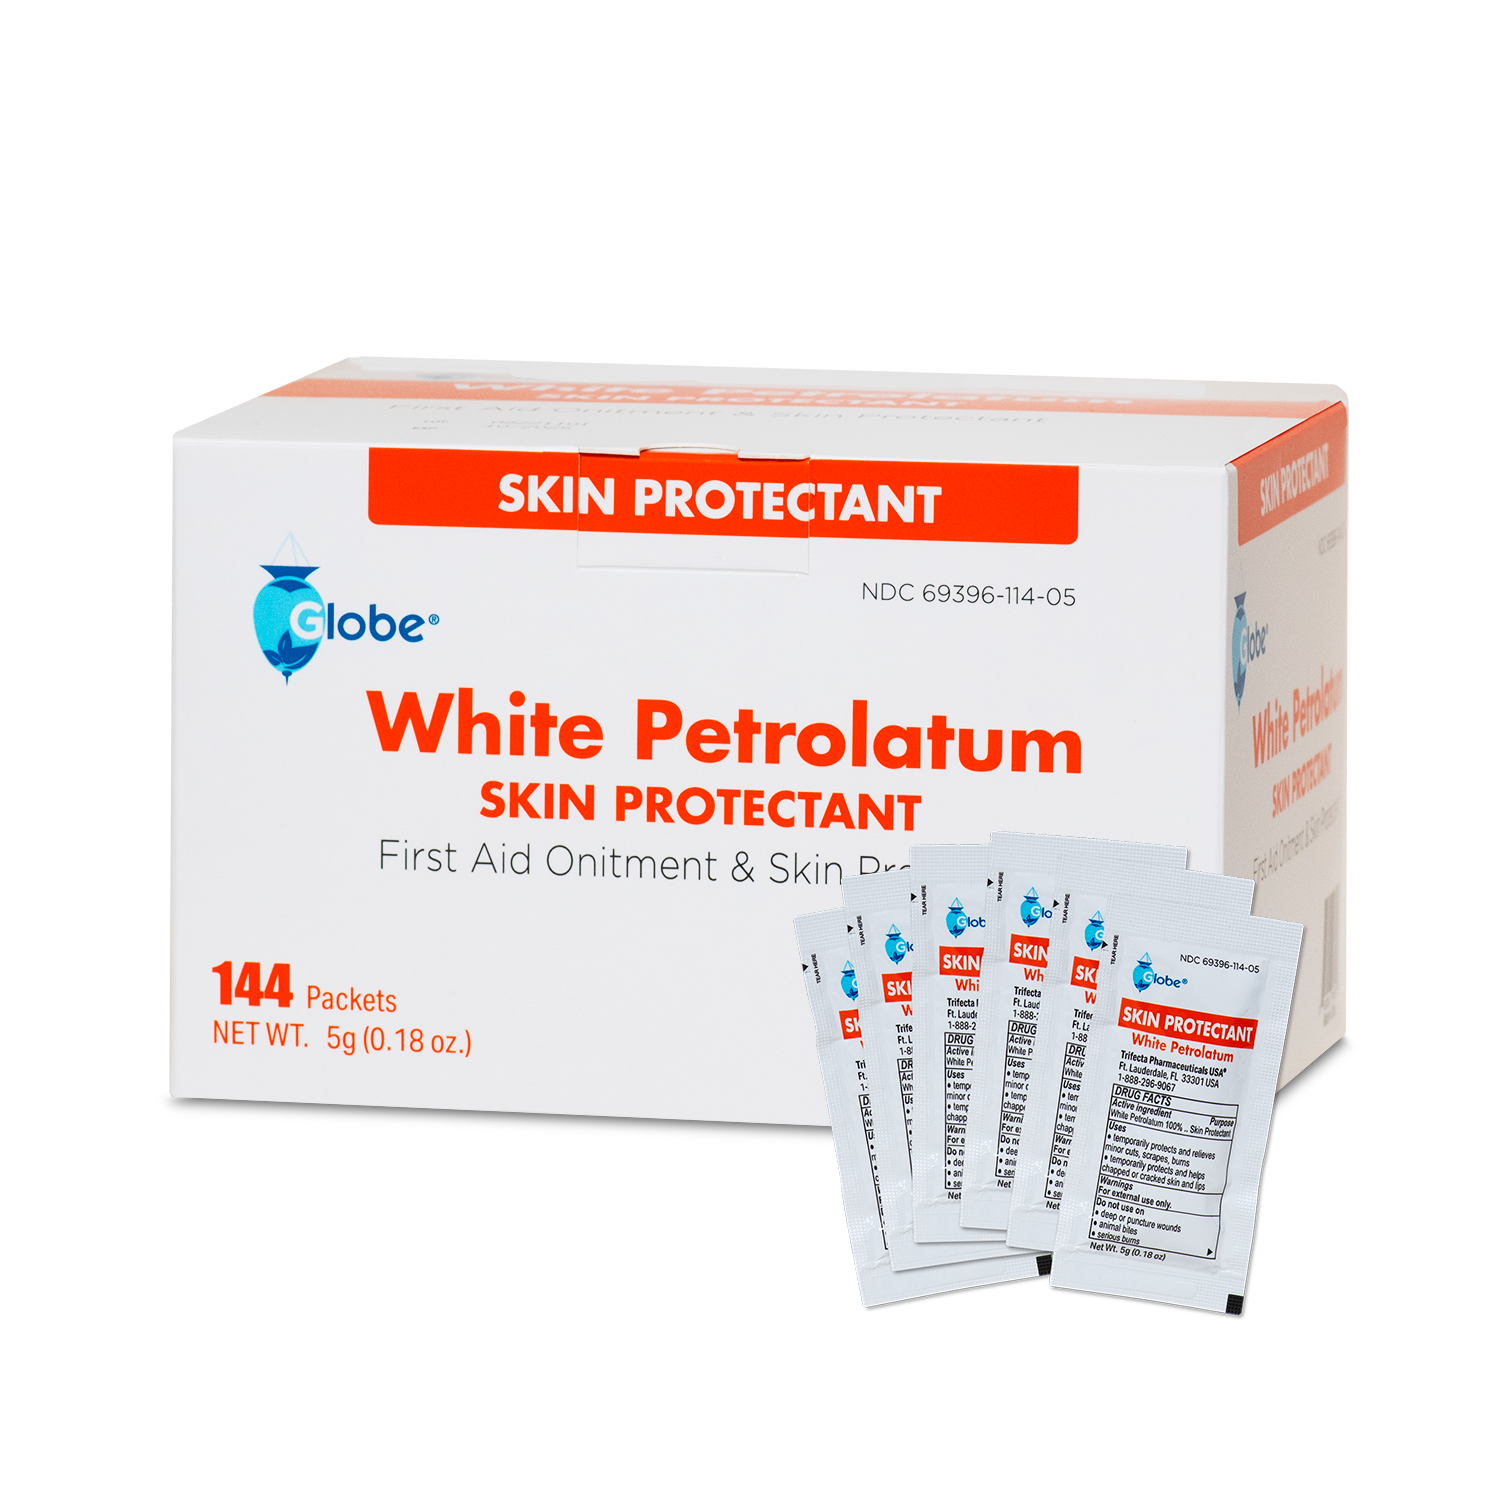 Globe (Box of 144) White Petrolatum, Petroleum Jelly for Dry or Cracked Skin, Soothing White Petroleum Jelly for Minor Skin Irritations, 5g Packet 975